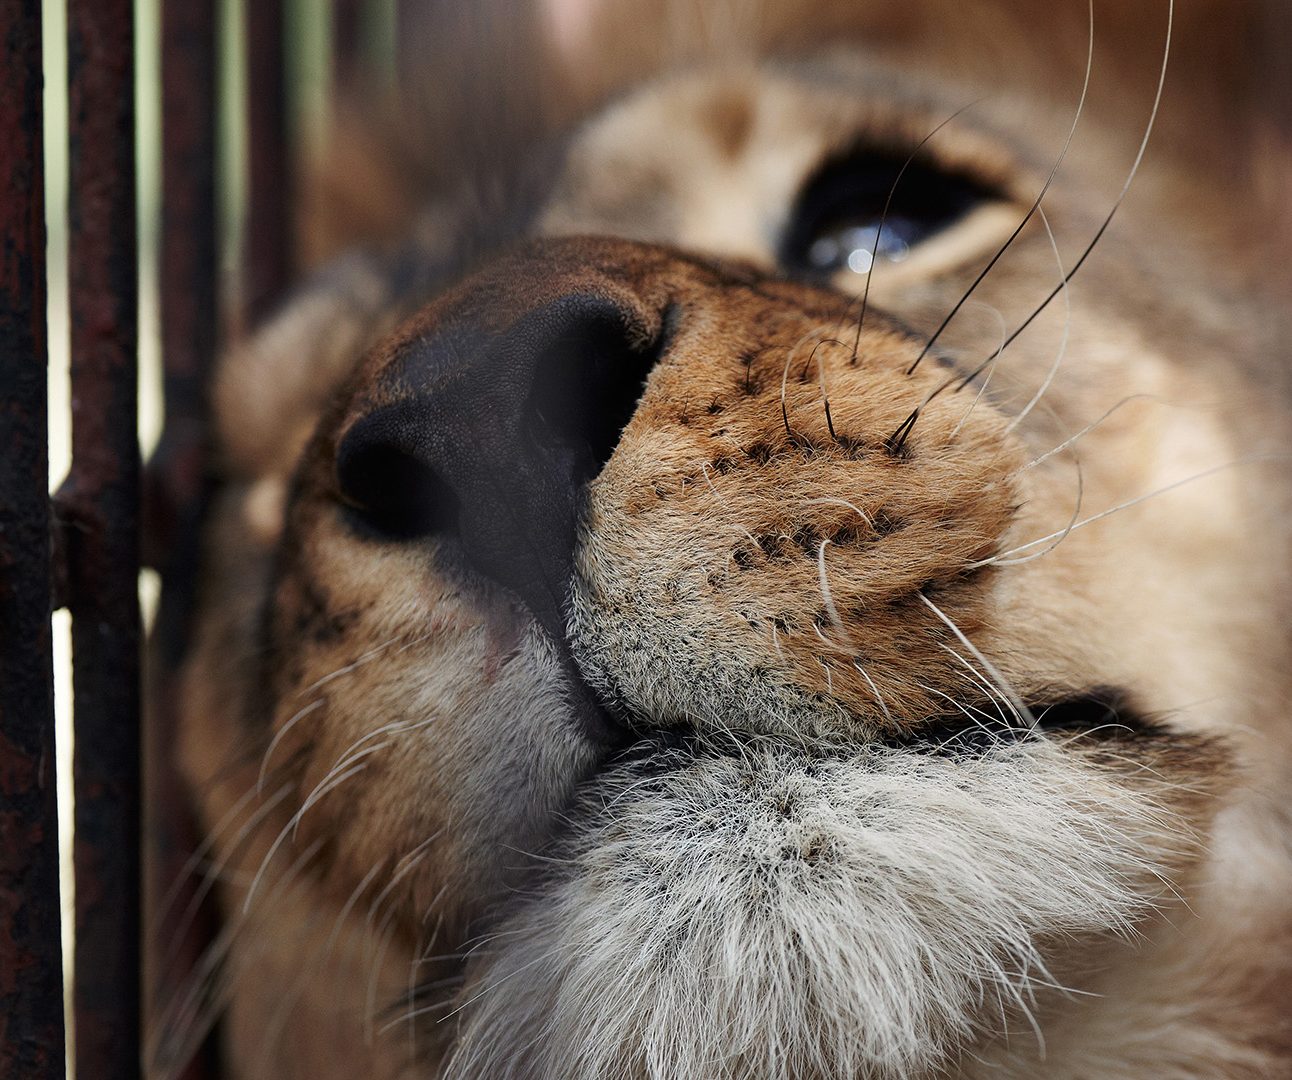 Close up of a lion leaning its head against bars